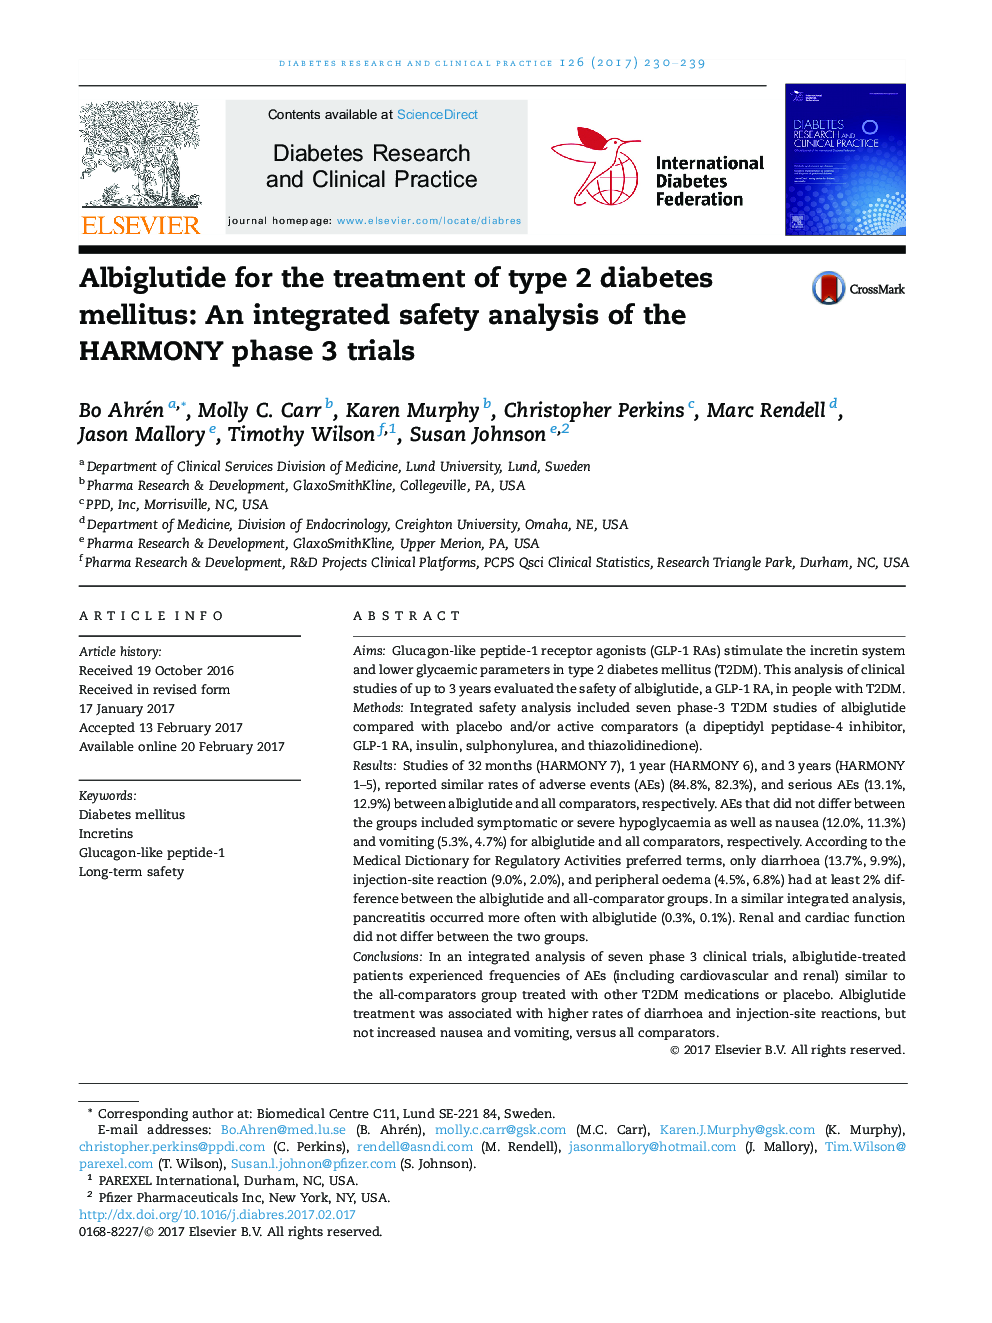 Albiglutide for the treatment of type 2 diabetes mellitus: An integrated safety analysis of the HARMONY phase 3 trials